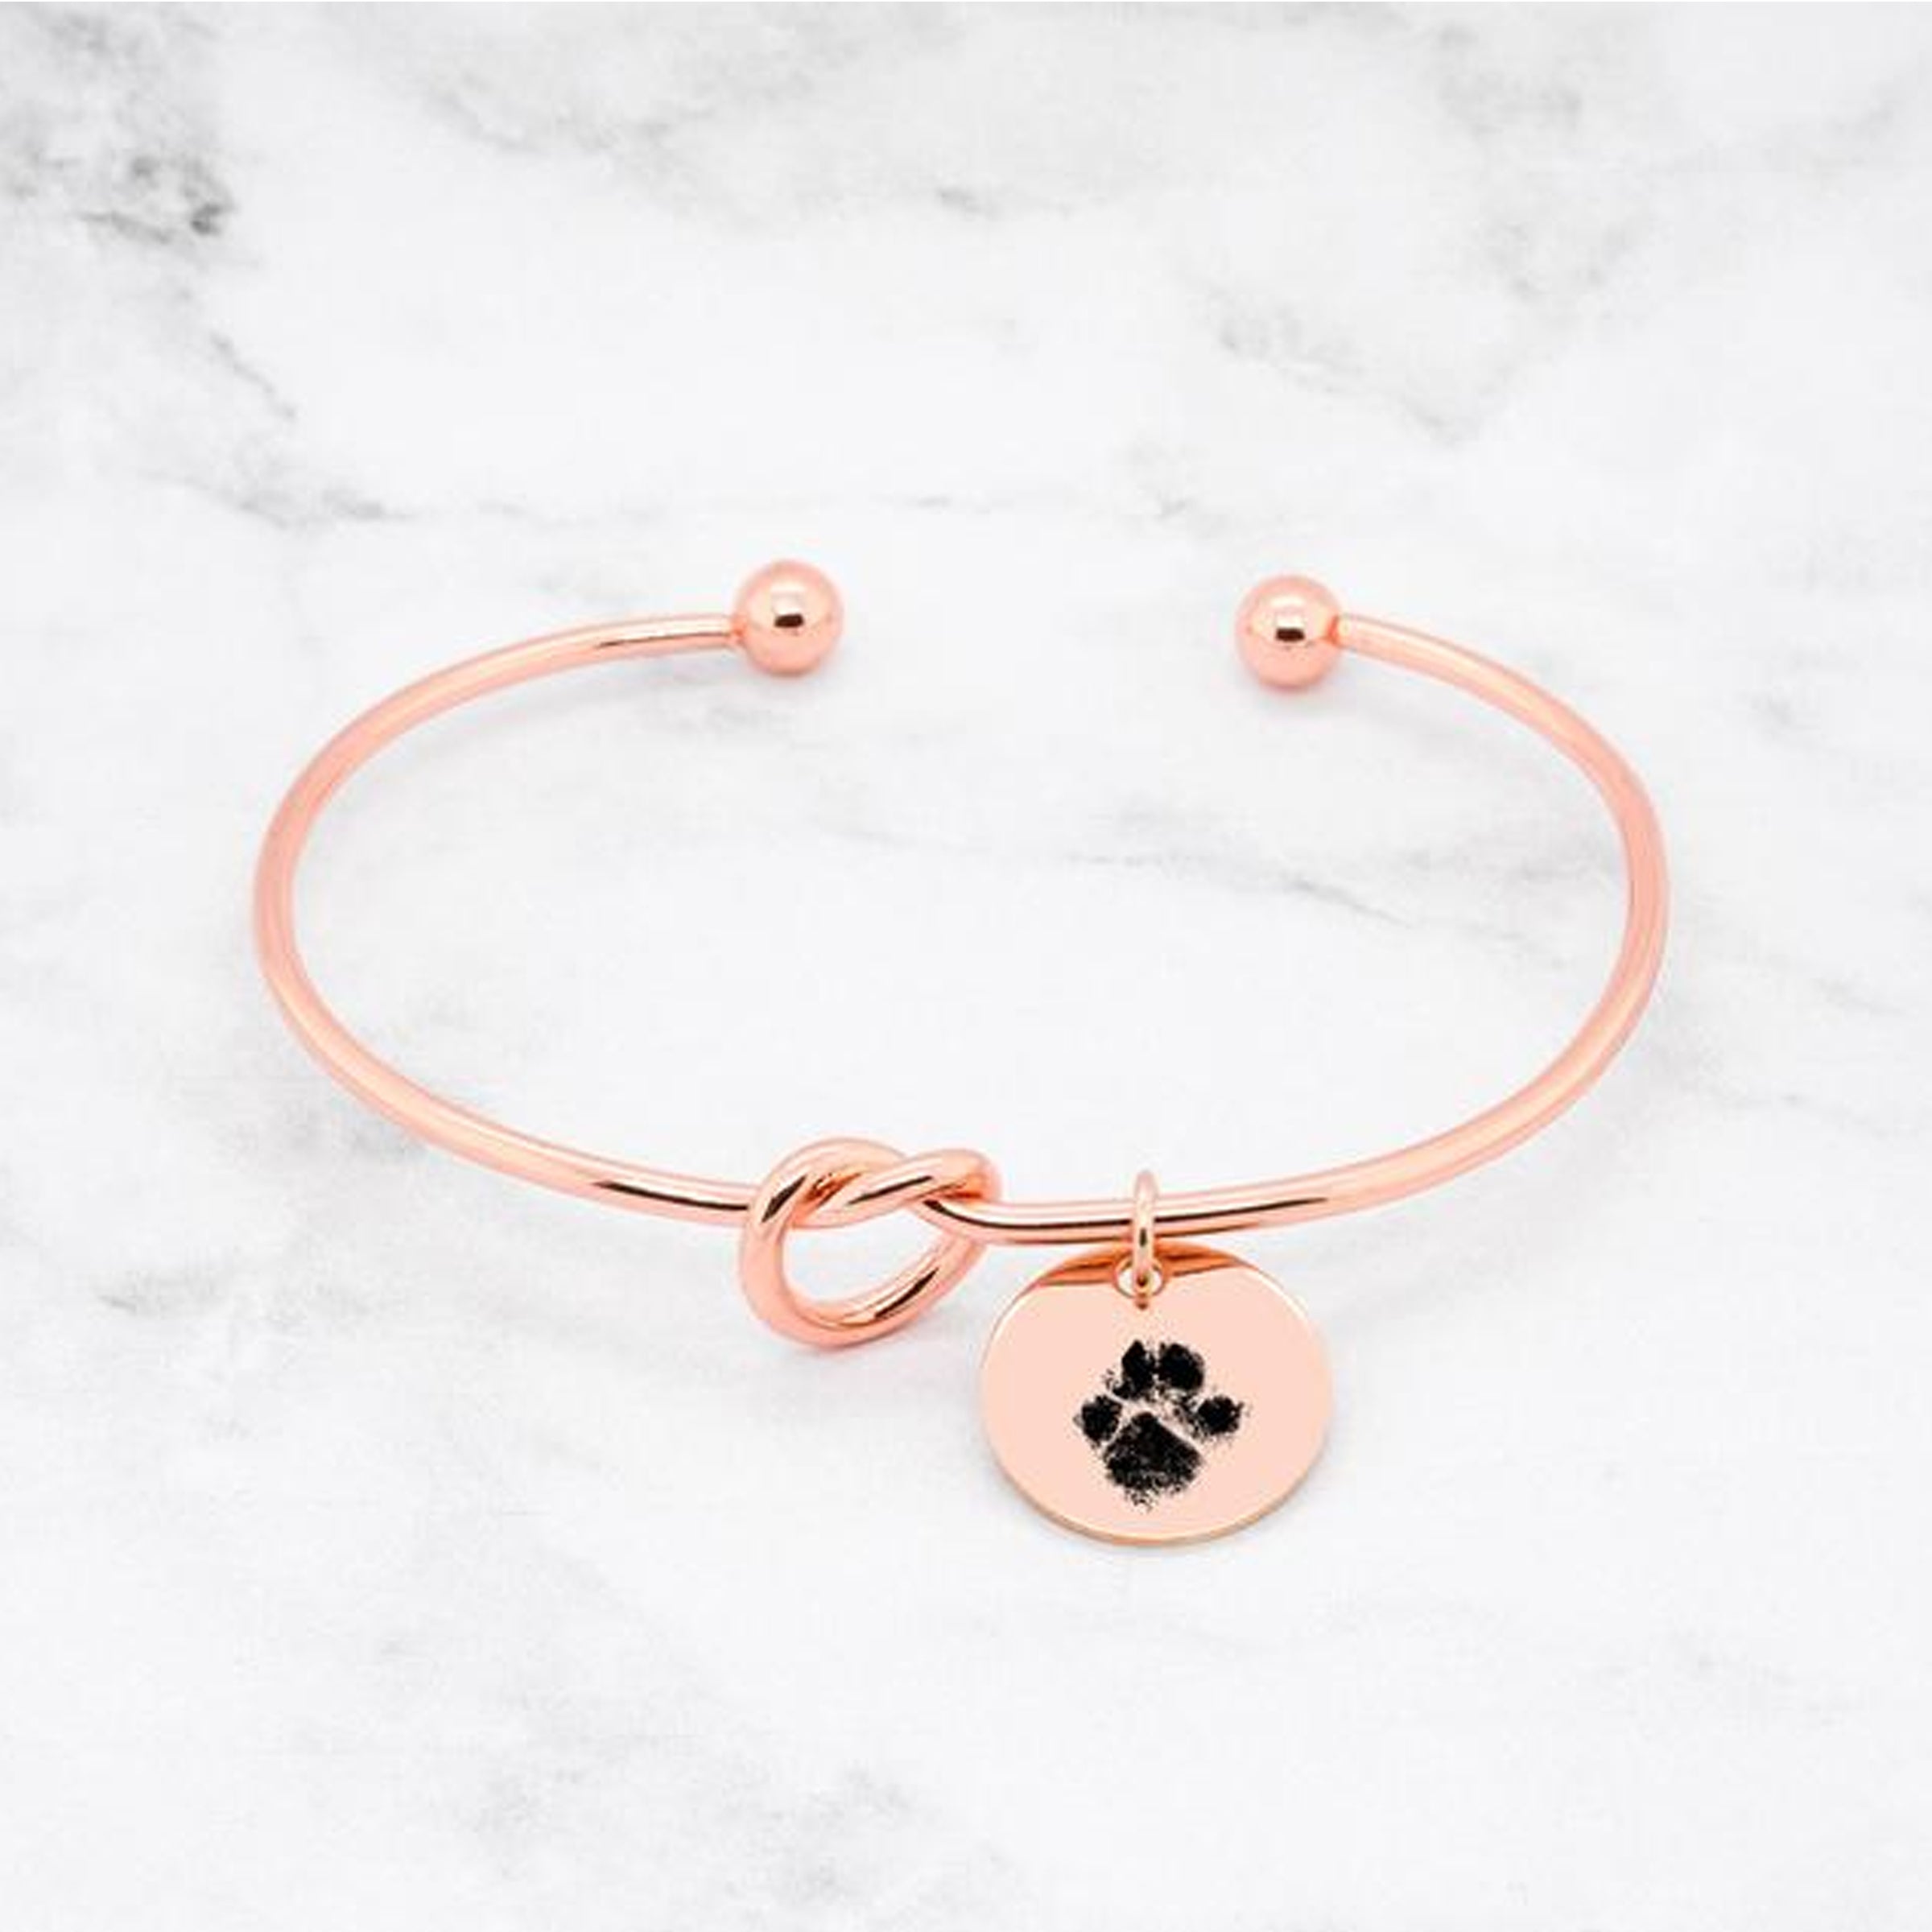 Paw Print Knot Bangle - Paw Print | Sincerely Silver